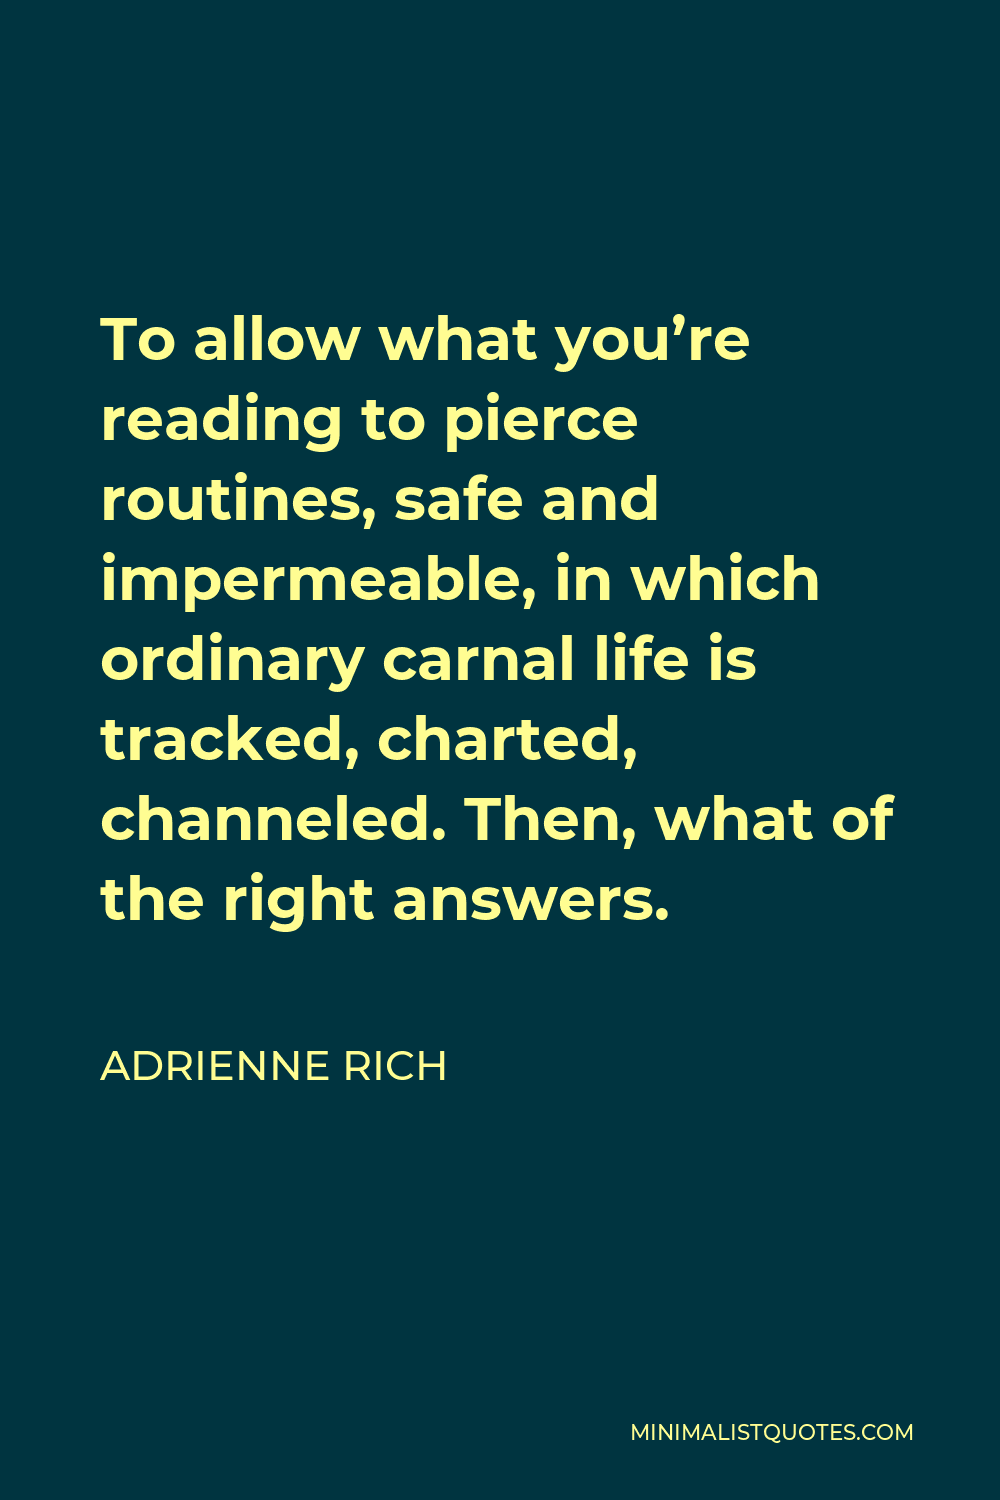 Adrienne Rich Quote - To allow what you’re reading to pierce routines, safe and impermeable, in which ordinary carnal life is tracked, charted, channeled. Then, what of the right answers.